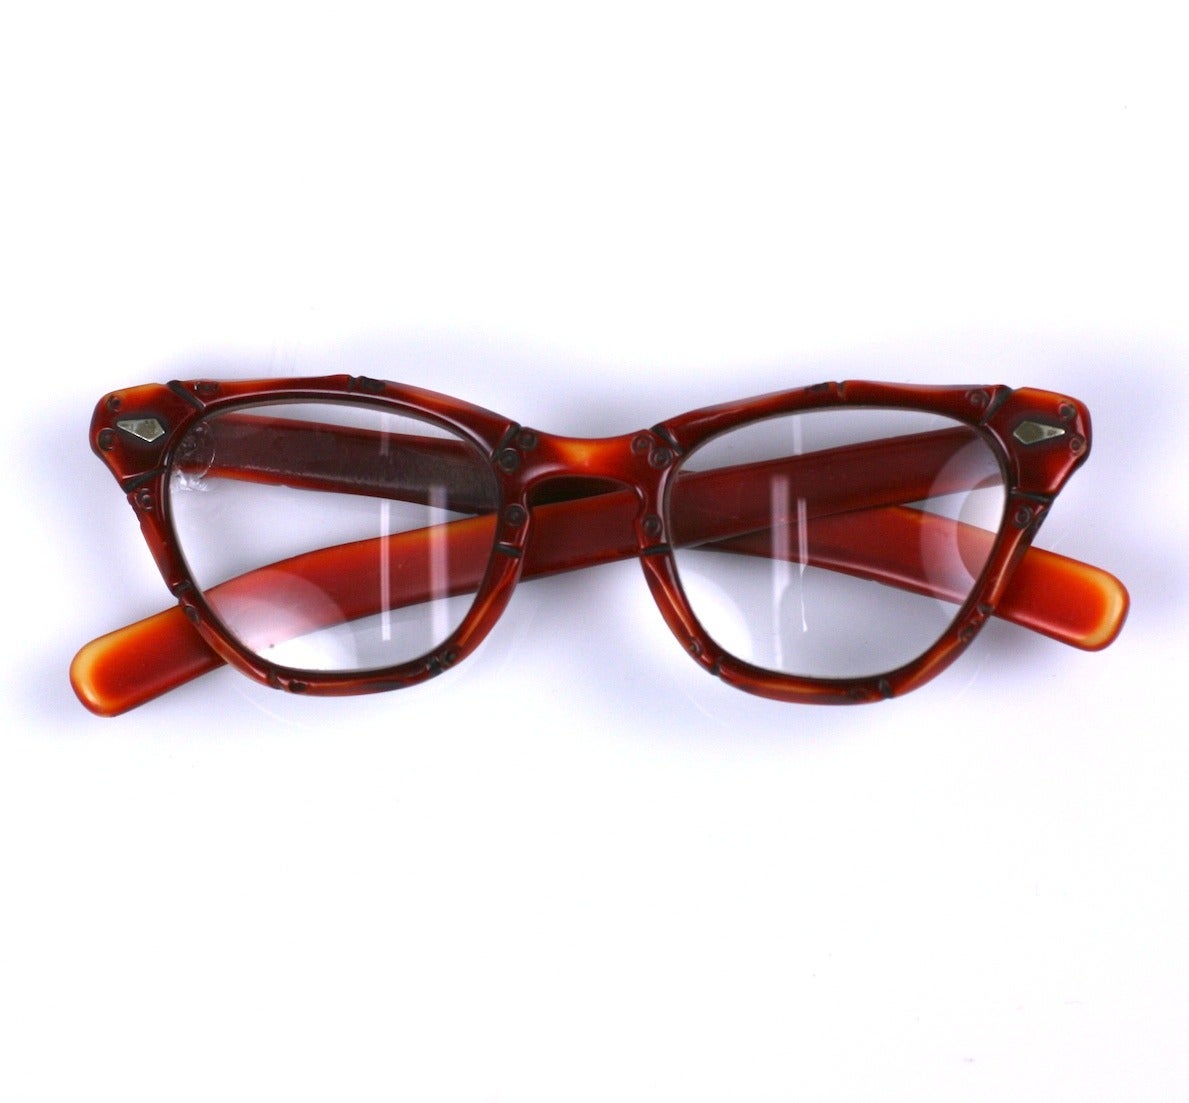 Art Deco hand carved bakelite eyeglass frames with wonderful patina. Cream bakelite with reddish-orange patination creates the look of bamboo with carved segmentation.
These charming frames currently have prescription lenses (one chipped) which